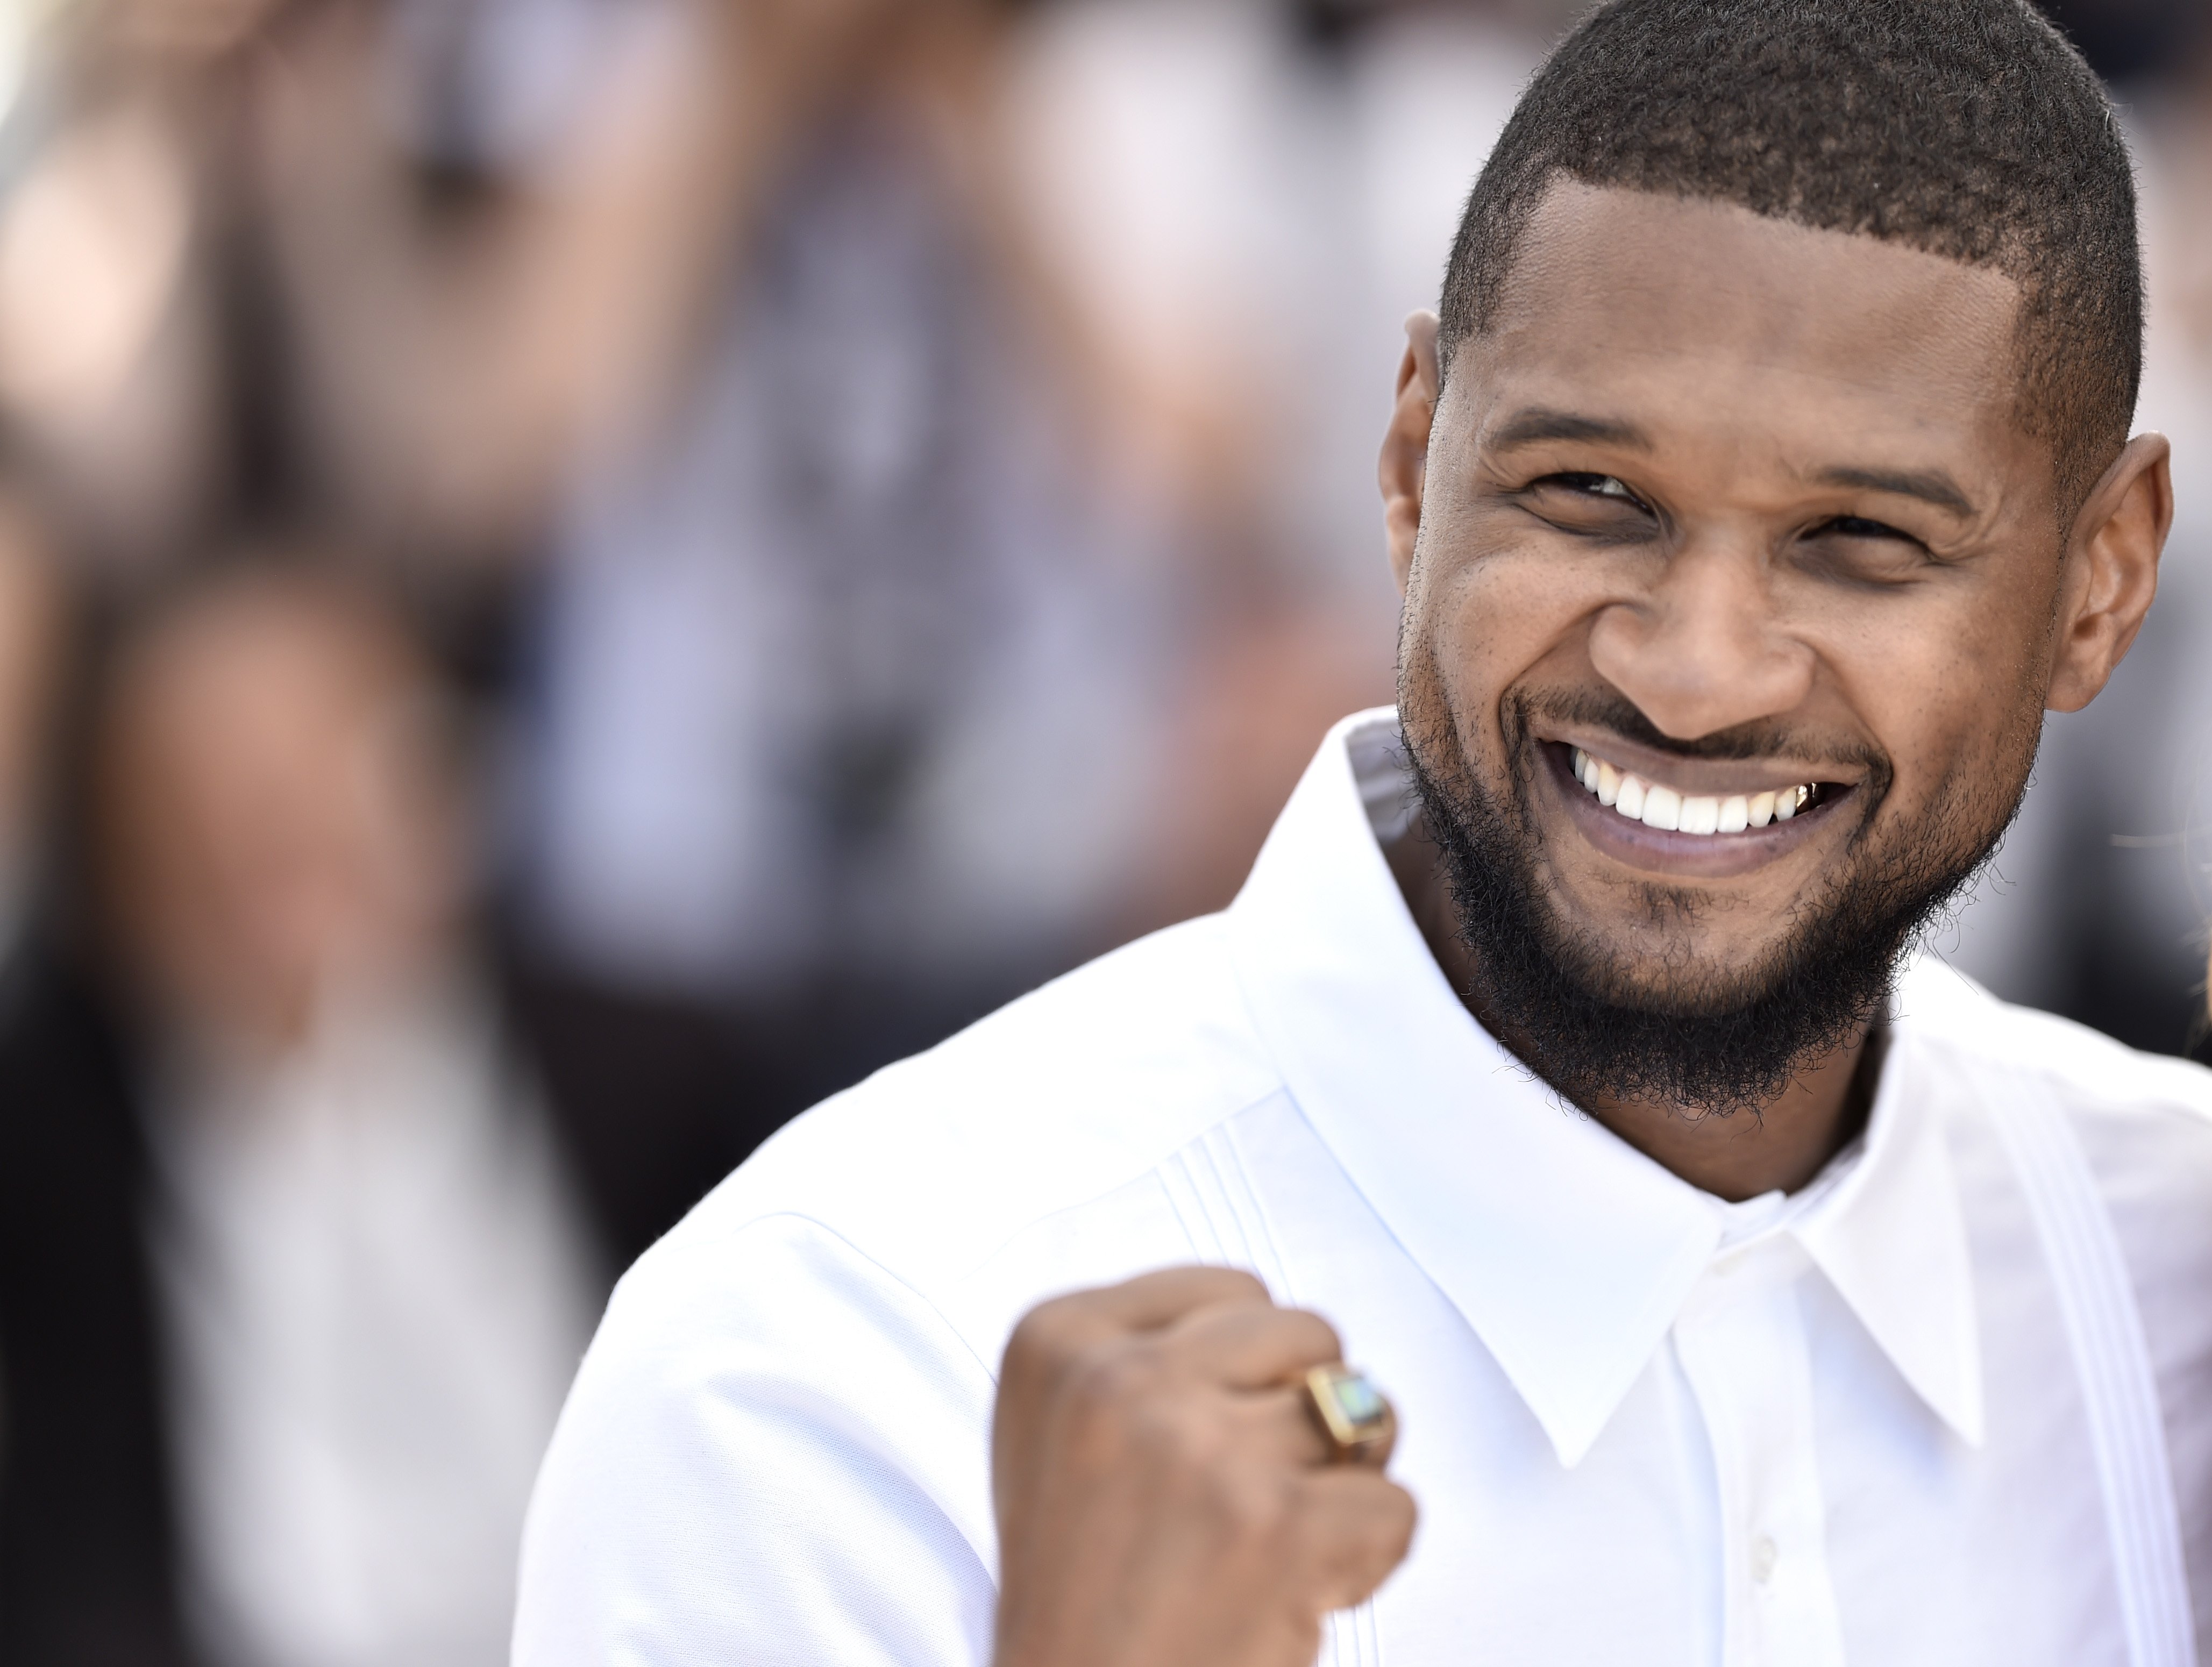 Usher pictured during the 69th annual Cannes Film Festival at the Palais des Festivals on May 16, 2016 in Cannes, France. | Source: Getty Images